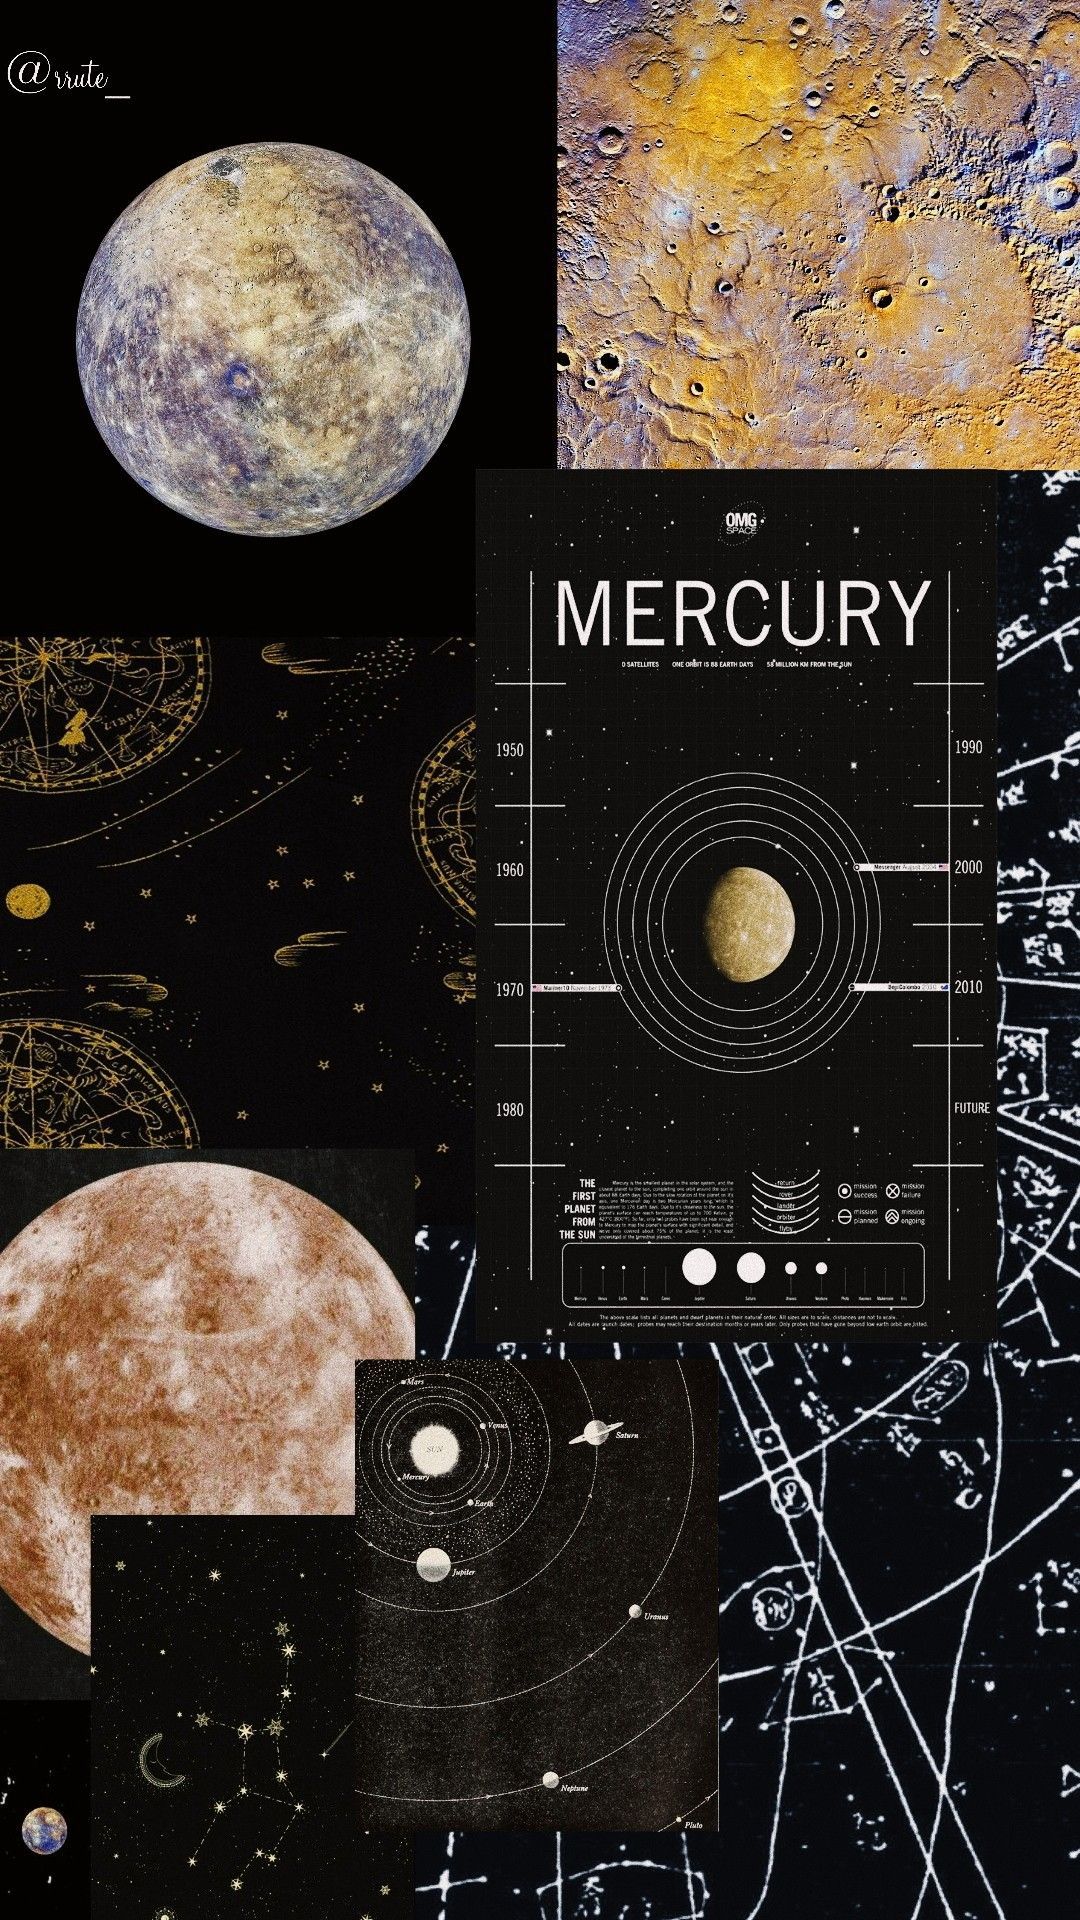 A collage of images of Mercury, the planet, and its moon - Science